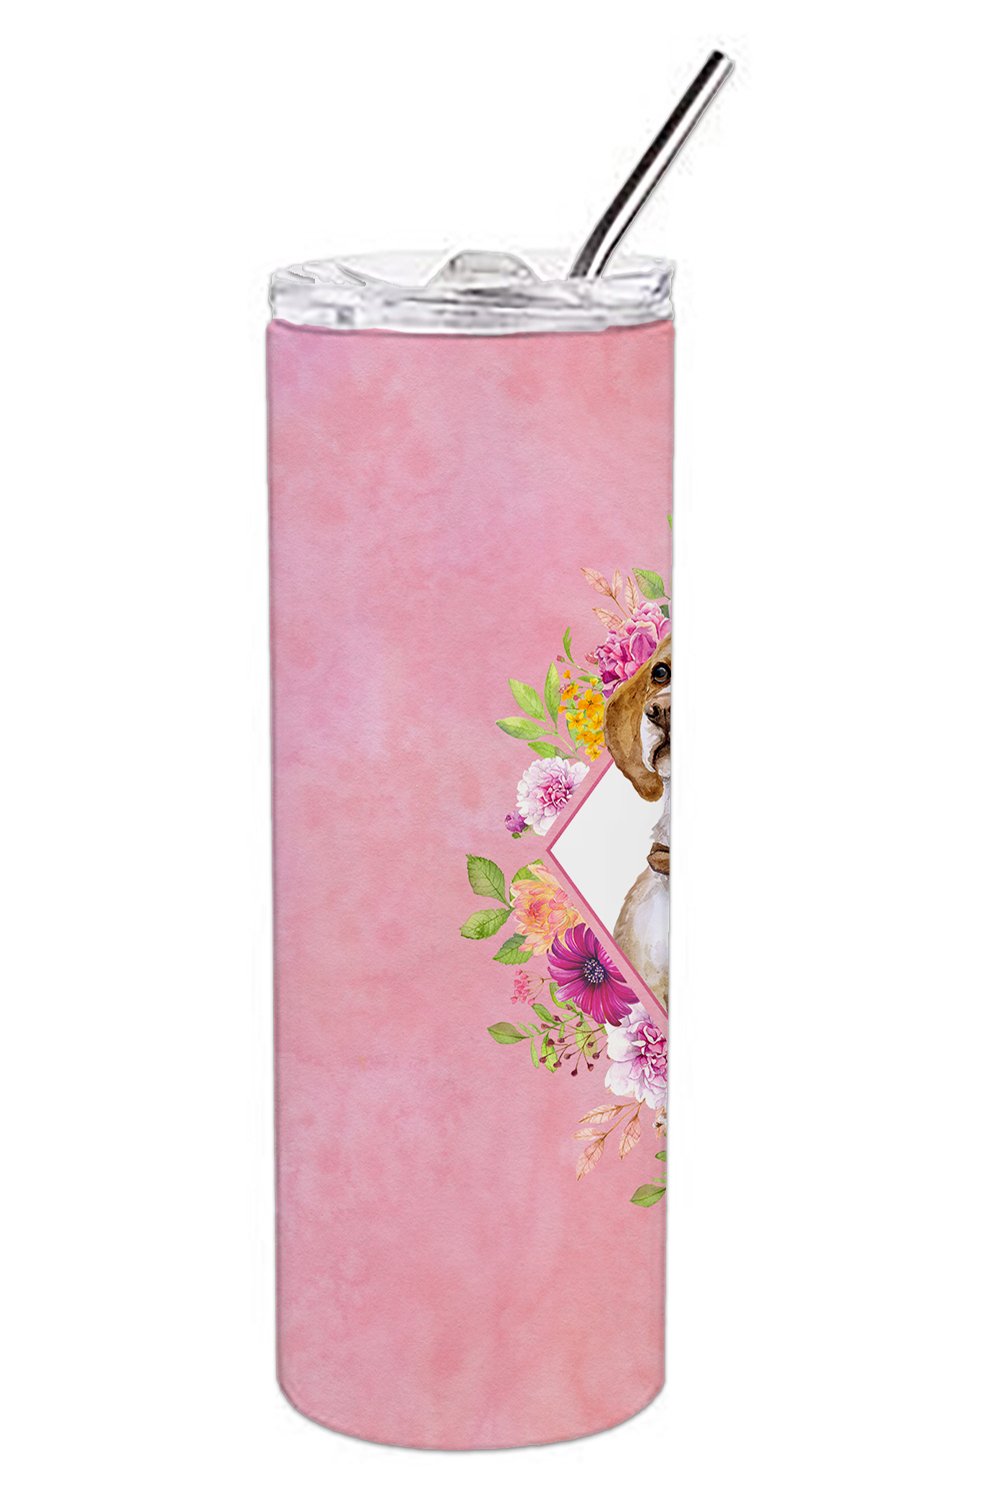 Beagle Pink Flowers Double Walled Stainless Steel 20 oz Skinny Tumbler CK4117TBL20 by Caroline's Treasures